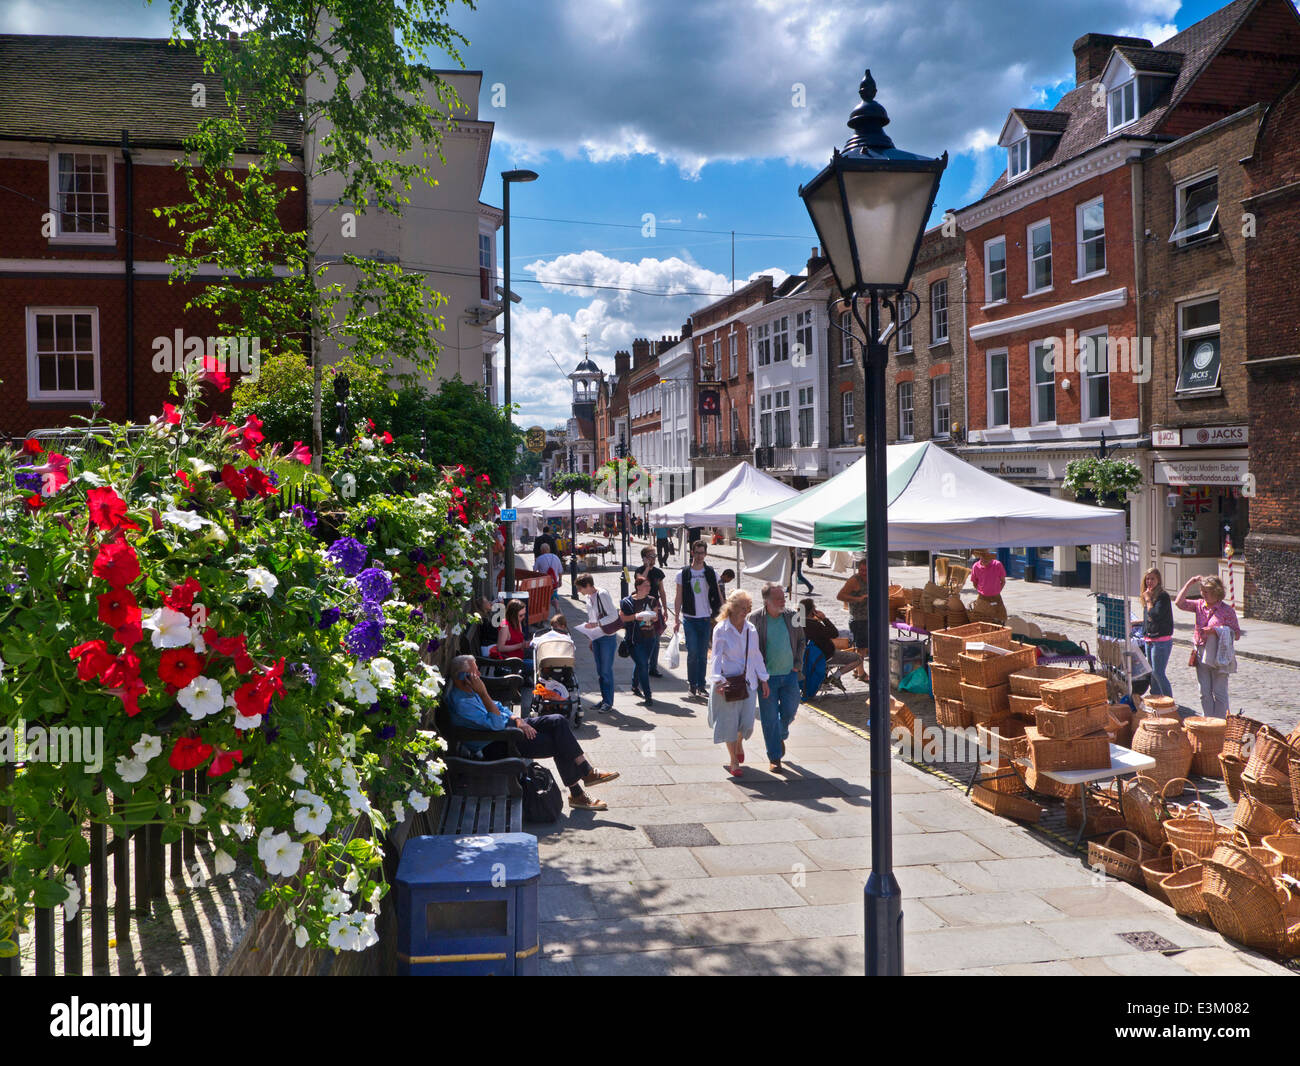 MARKET GUILDFORD Historic Guildford High Street and shoppers on a floral summer arts and crafts market day Guildford Surrey UK Stock Photo